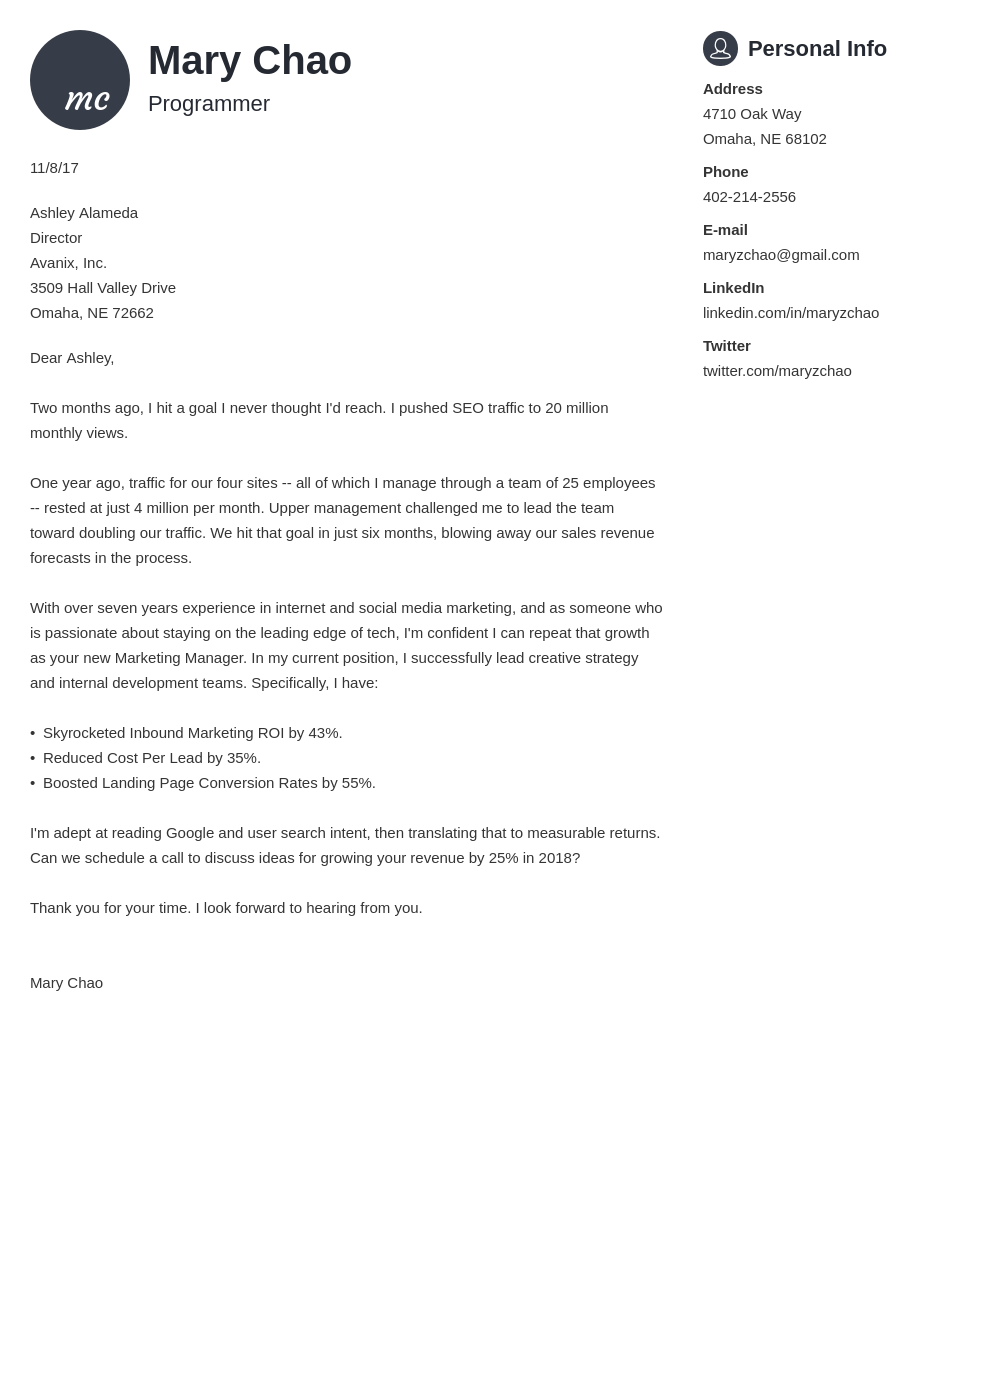 How To Format A Cover Letter In 2021 20 Proper Examples